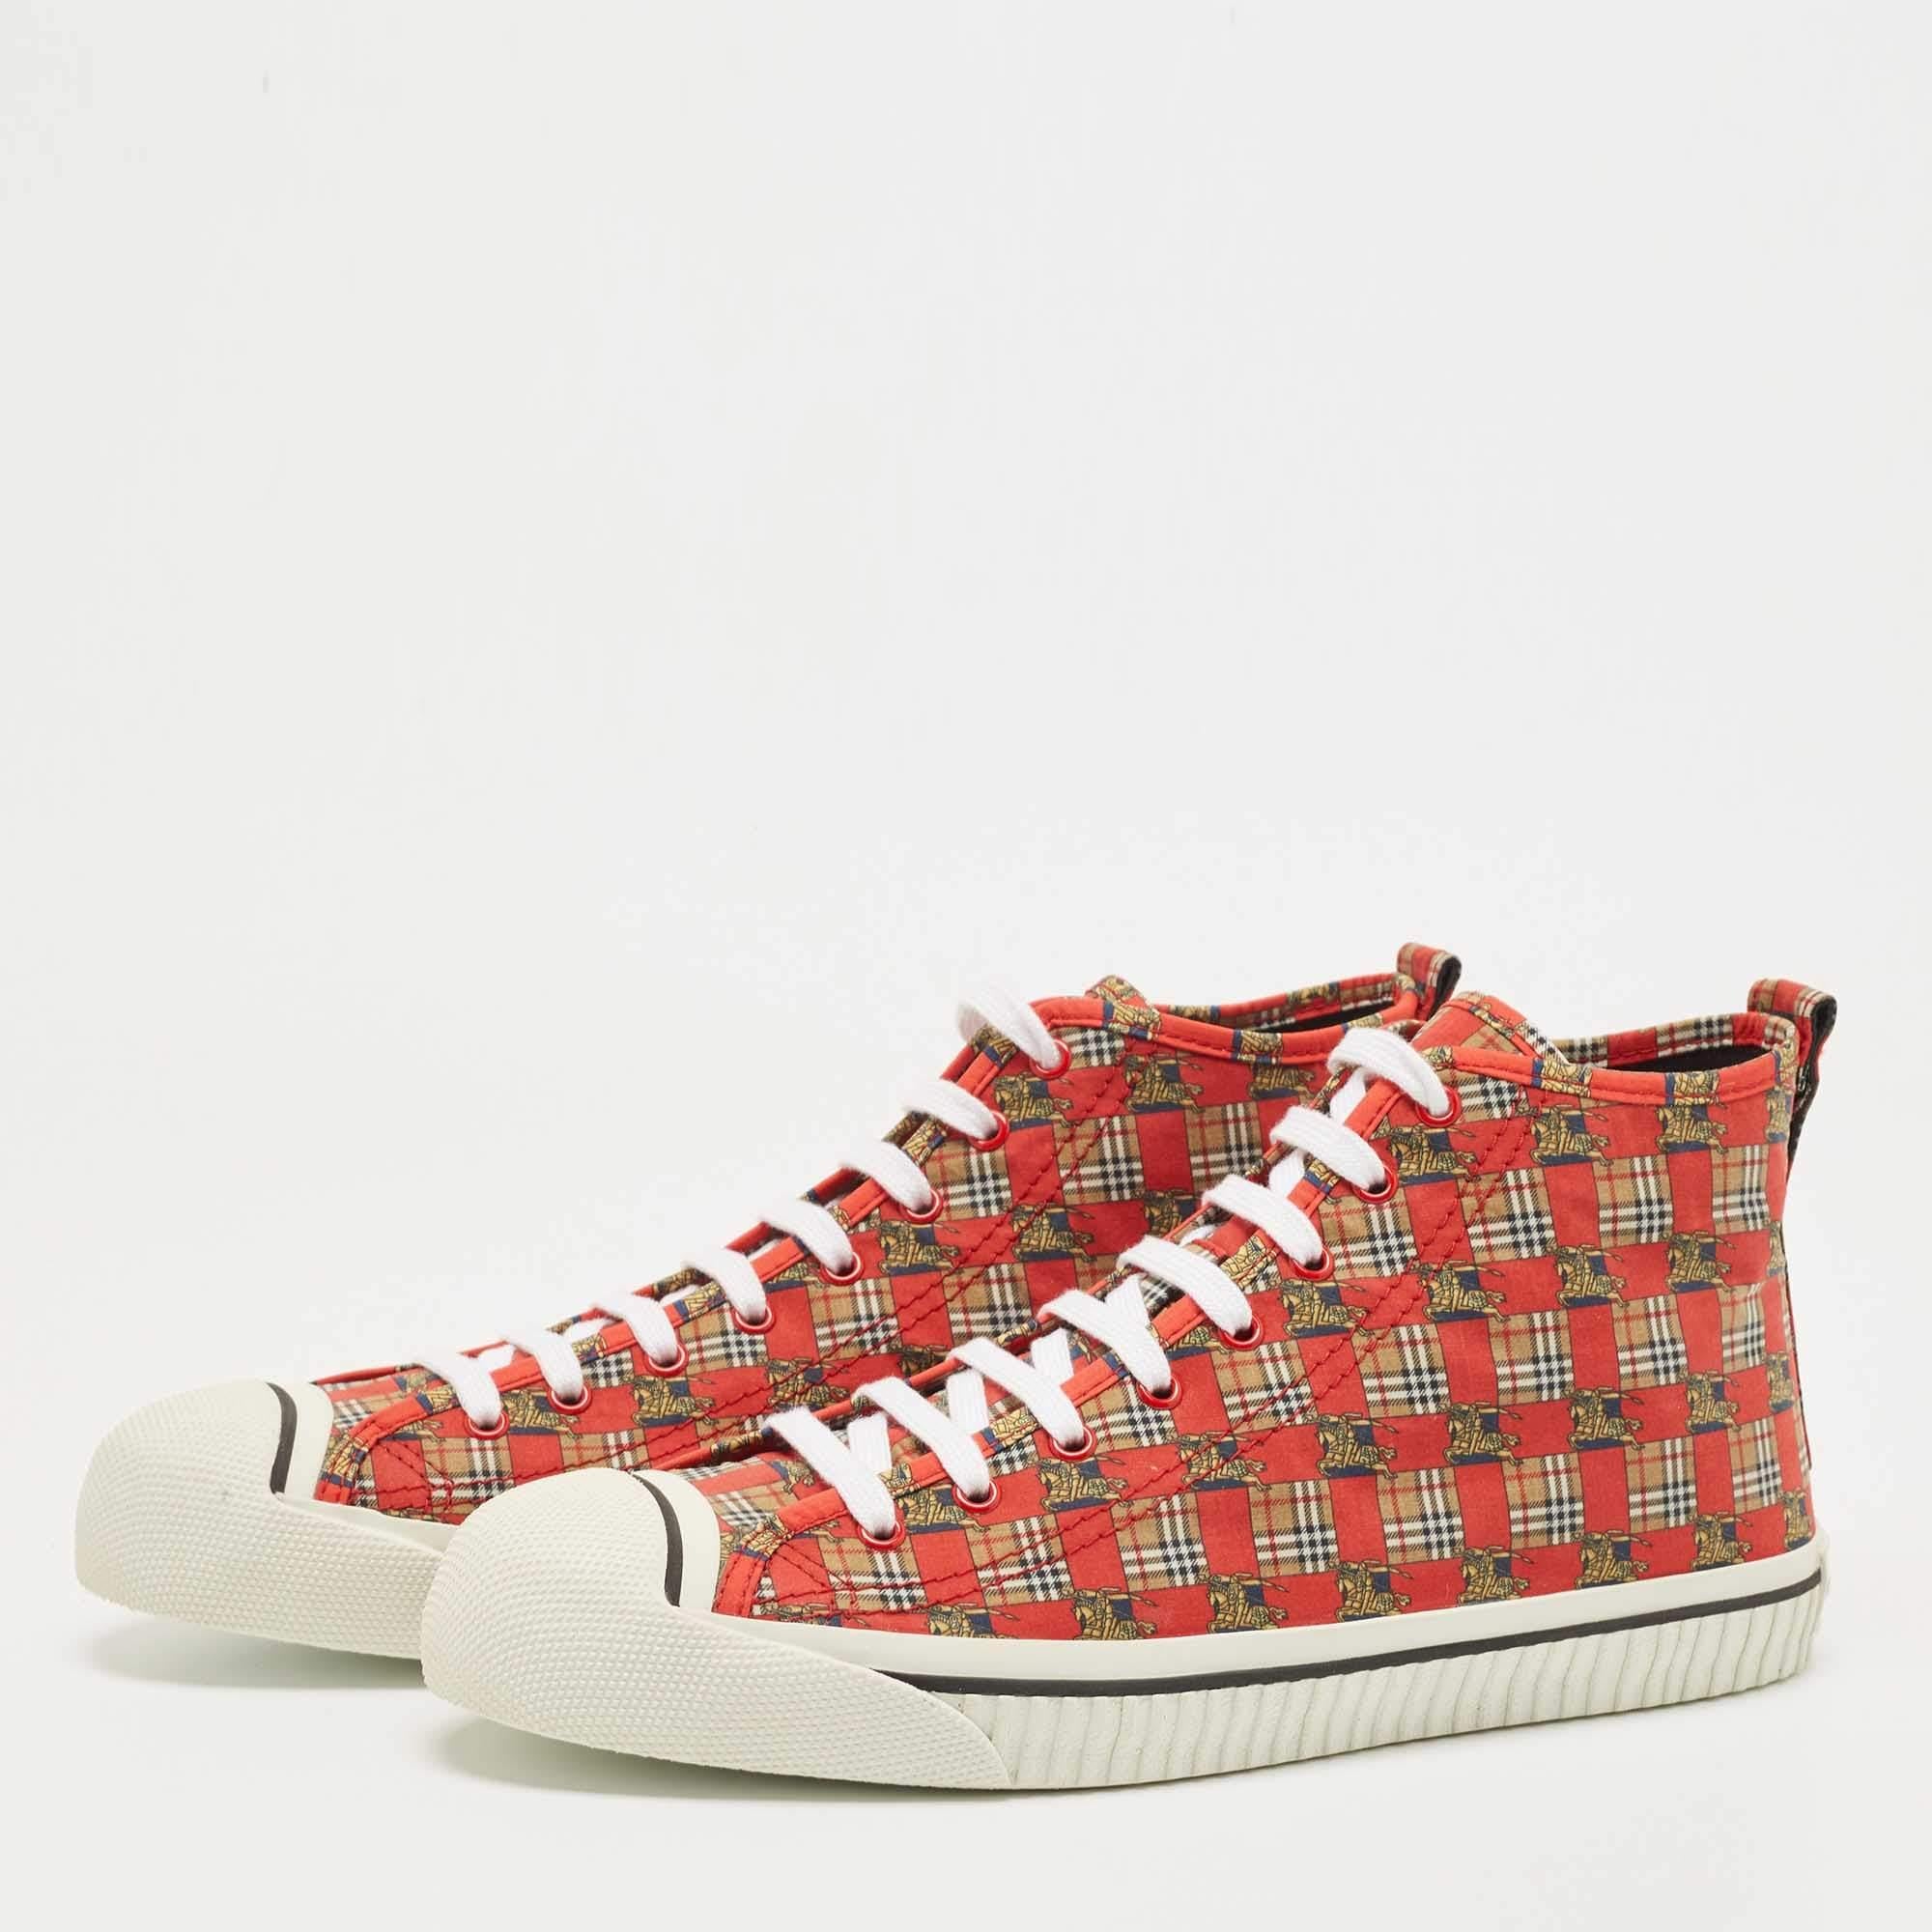 Burberry Red/Beige Canvas Kingly Print High Top Sneakers Size 45 For Sale 3